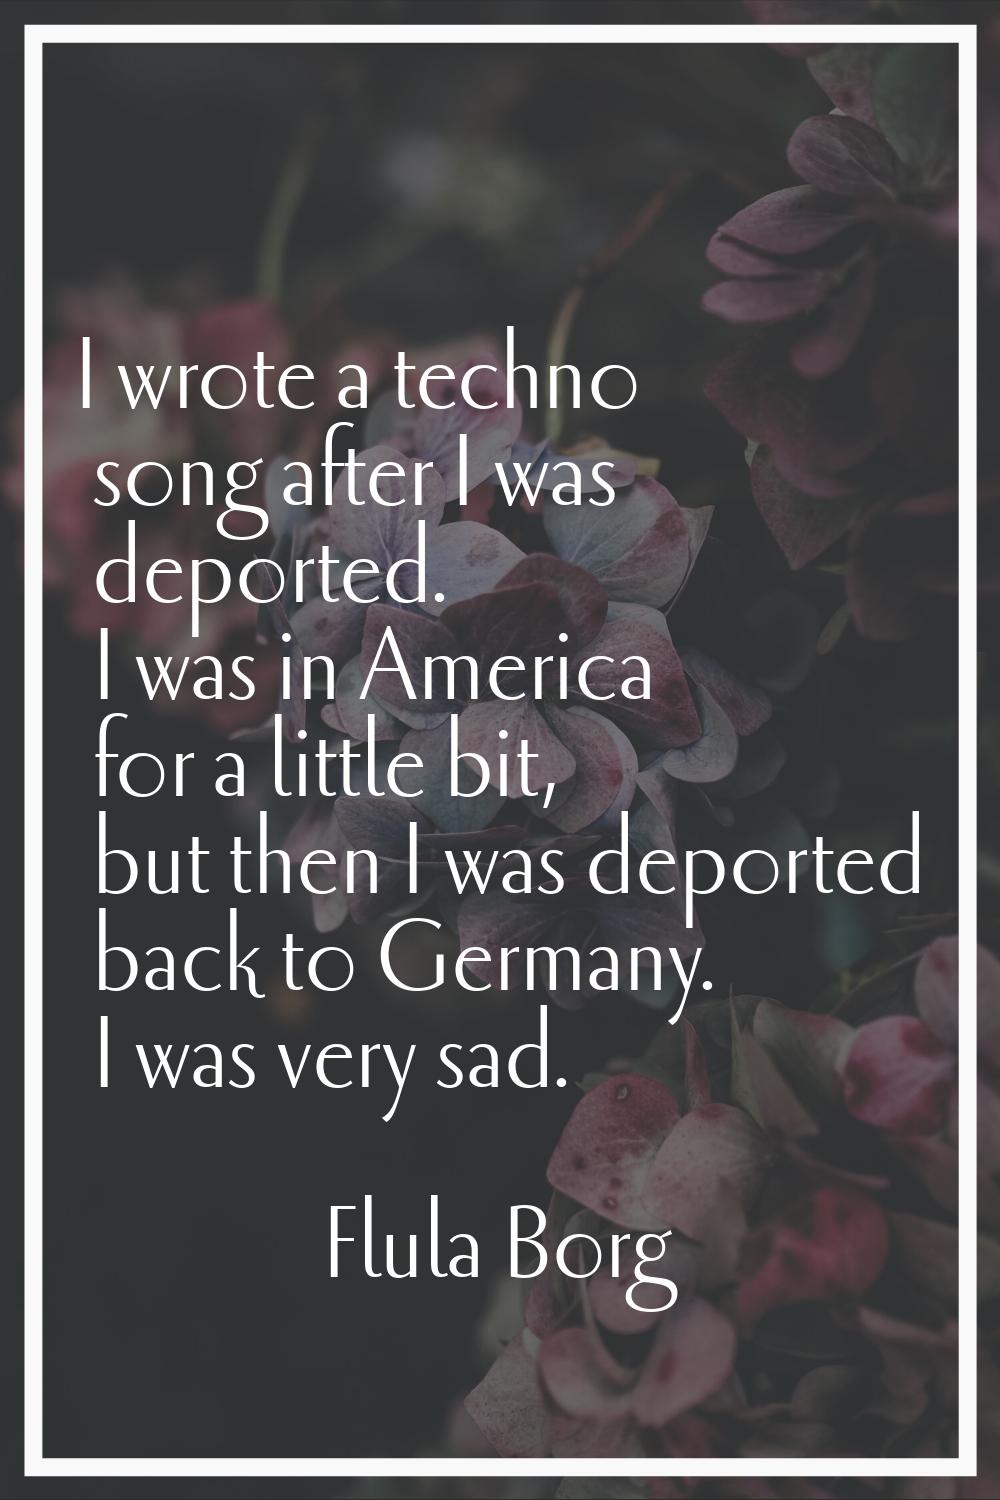 I wrote a techno song after I was deported. I was in America for a little bit, but then I was depor